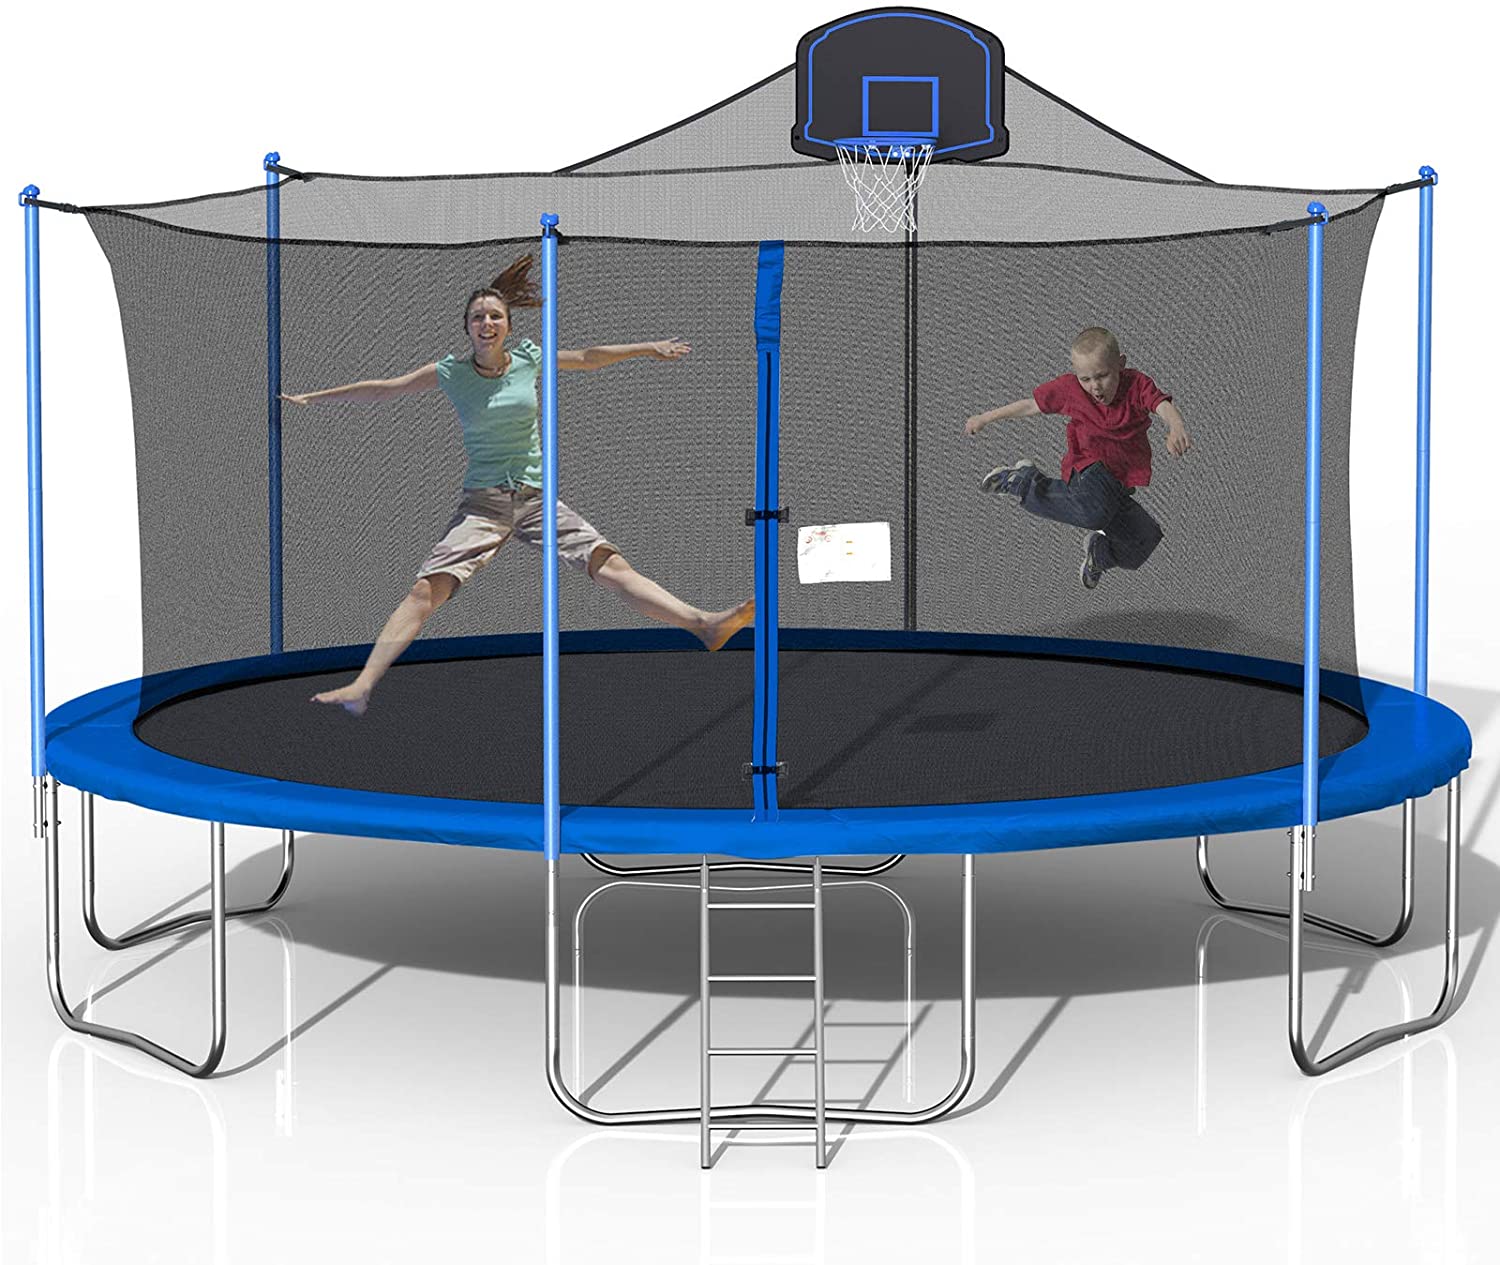 1000LBS 16Ft Trampoline for Kids and Adults with Safety Enclosure Net, Jumping Mat, Safety Pad, Outdoor Recreational Trampoline Hold Up to 8 Kids - image 1 of 6